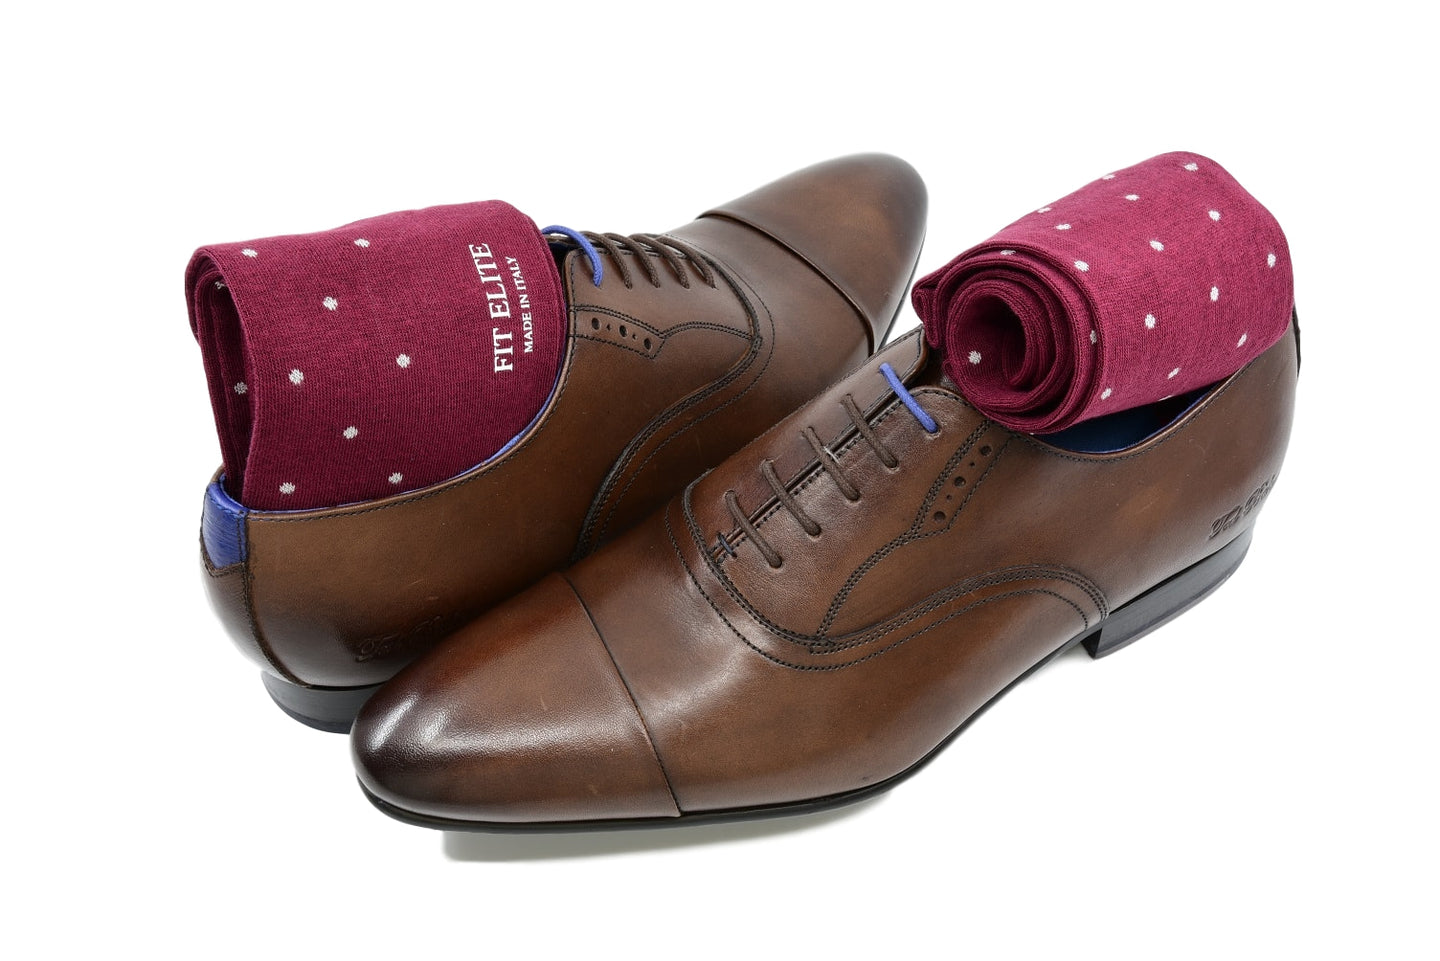 Men's burgundy dress socks with grey polka dots and brown shoes